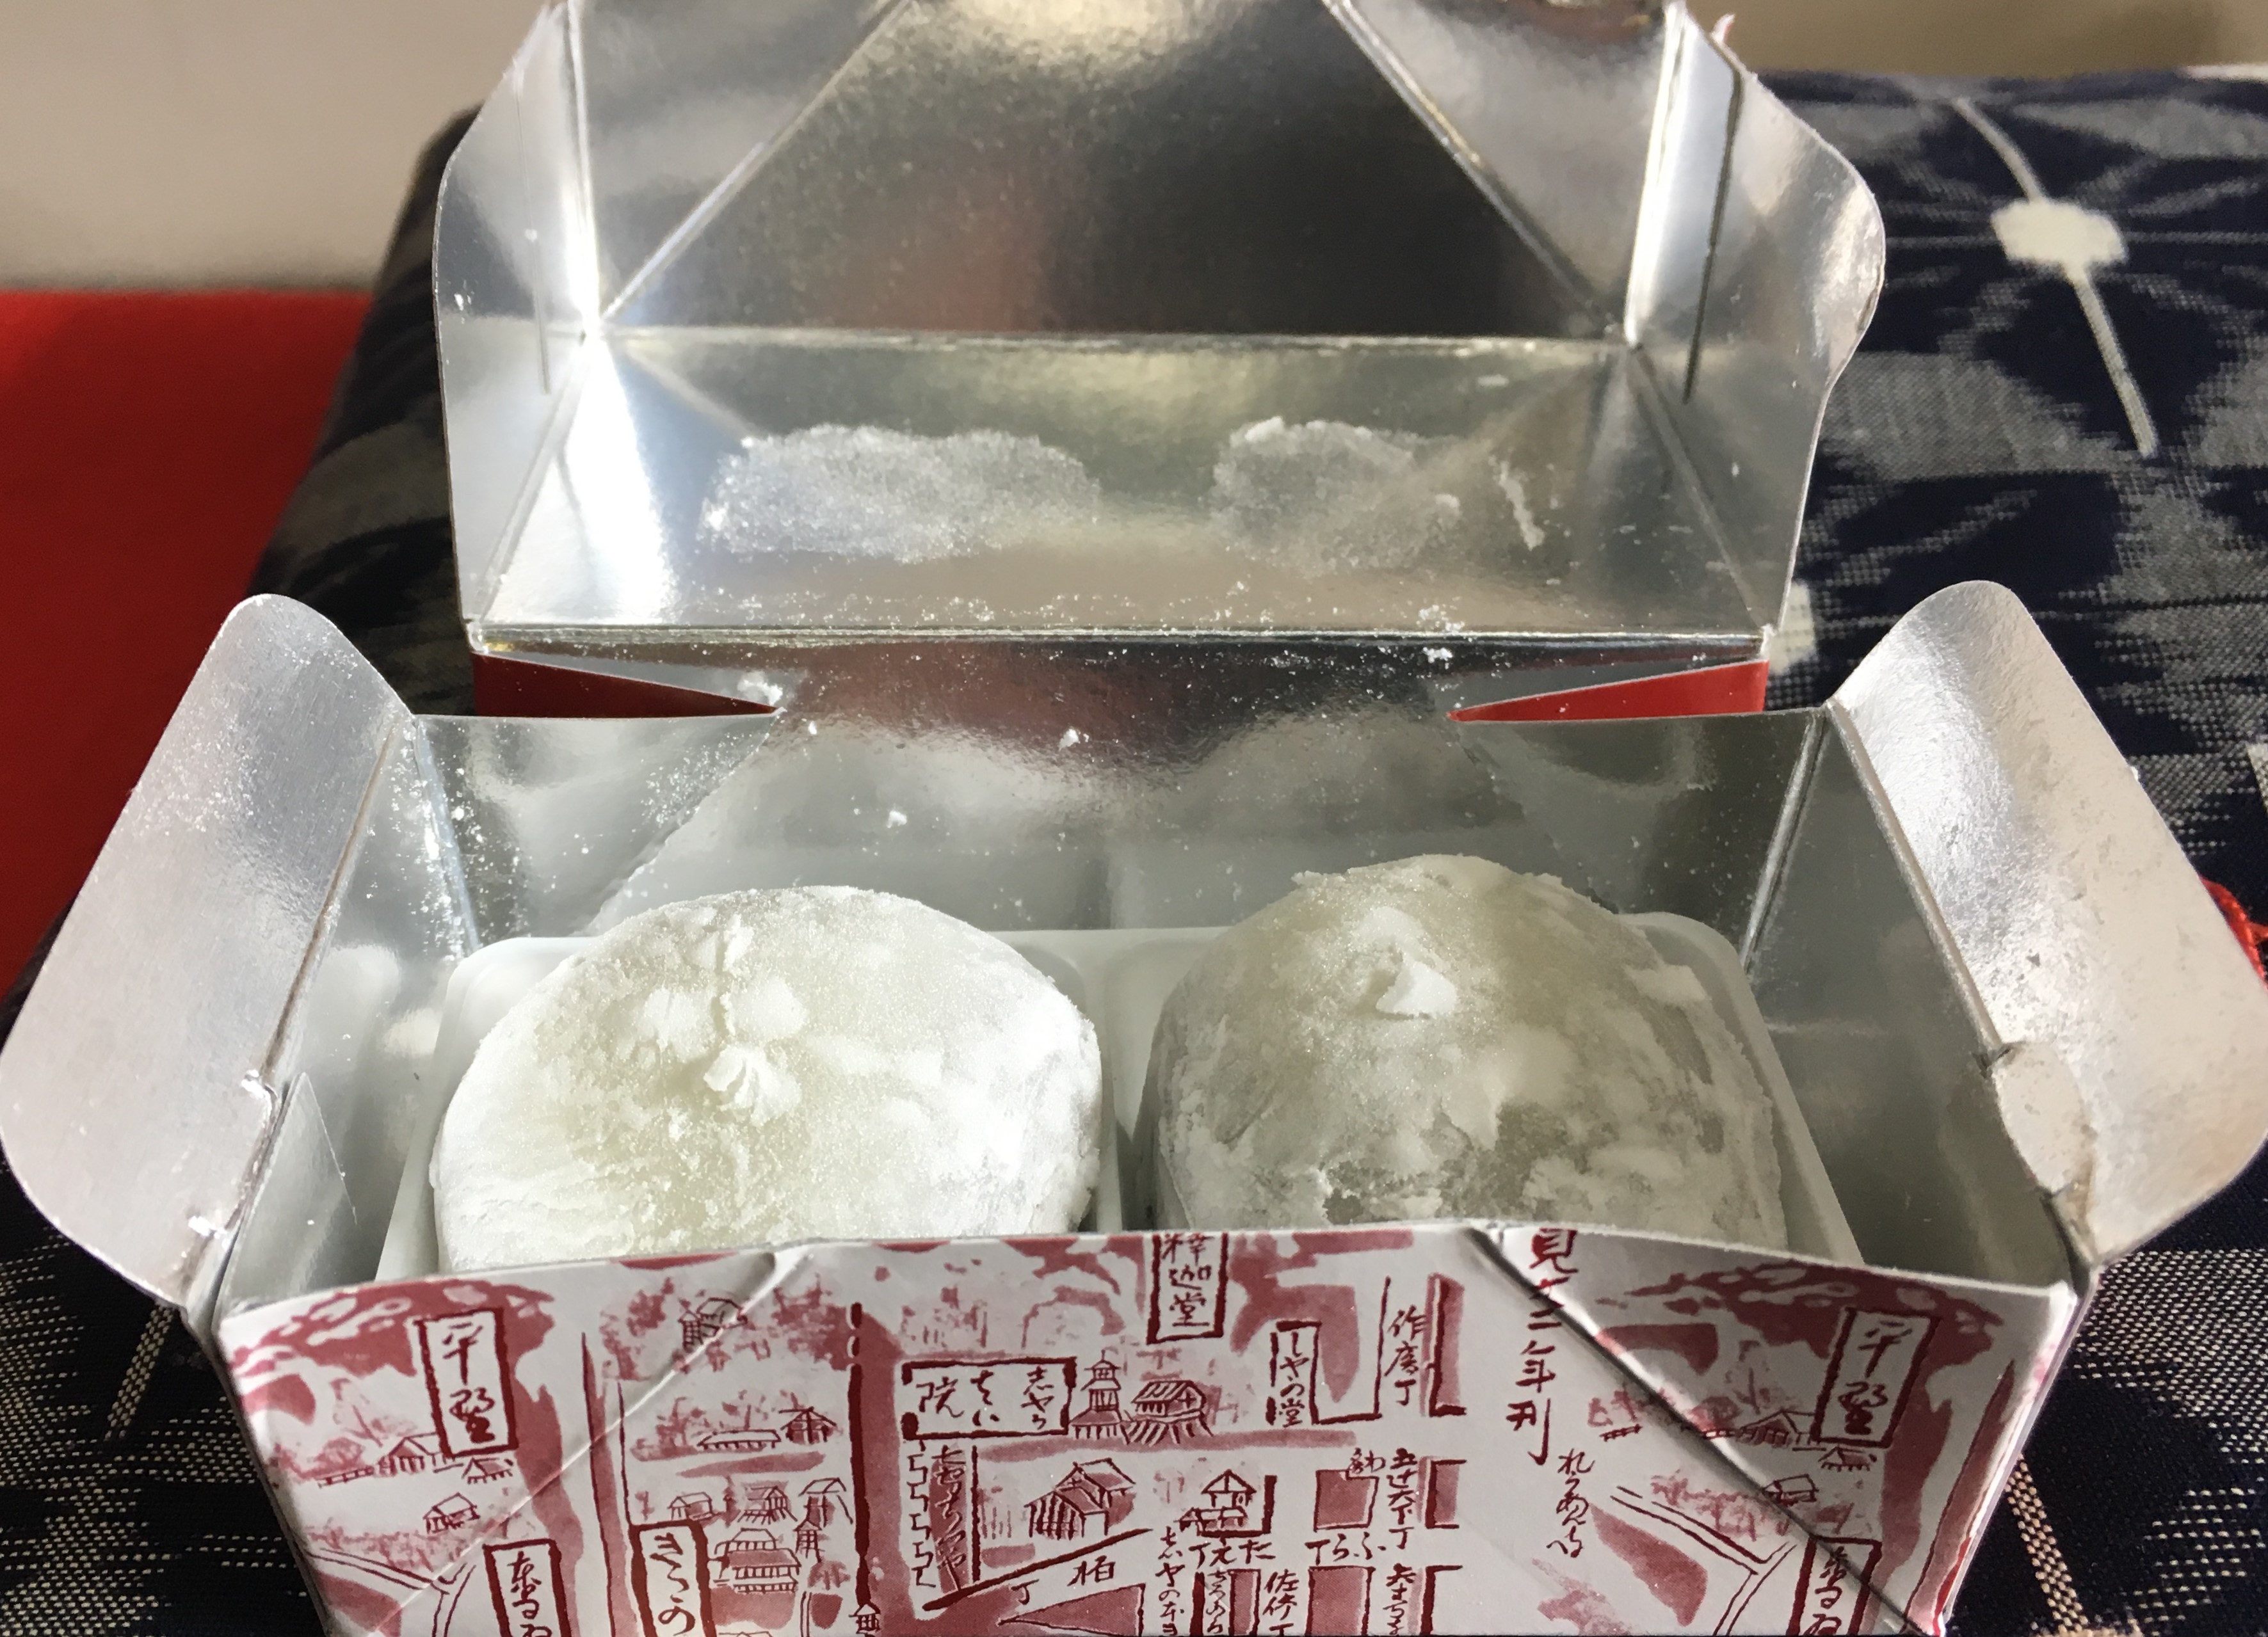 two white pillowy looking balls of mochi in a red and white box